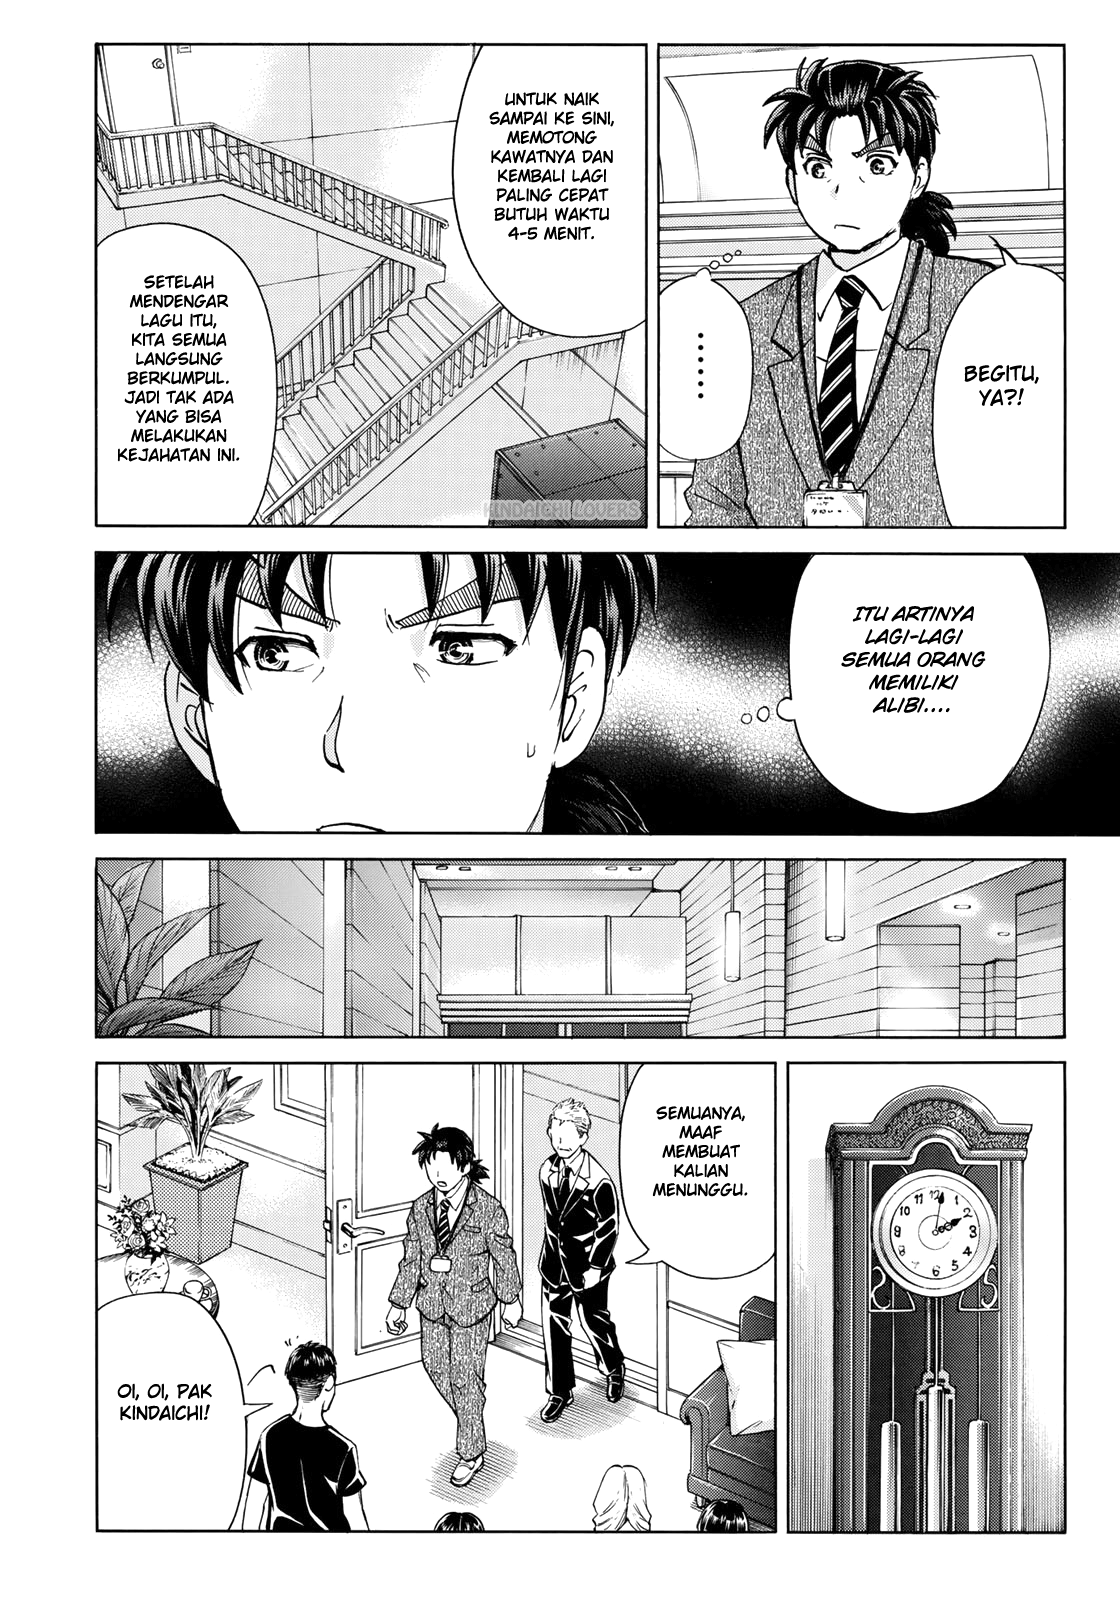 37 Year Old Kindaichi Case Files Chapter 7